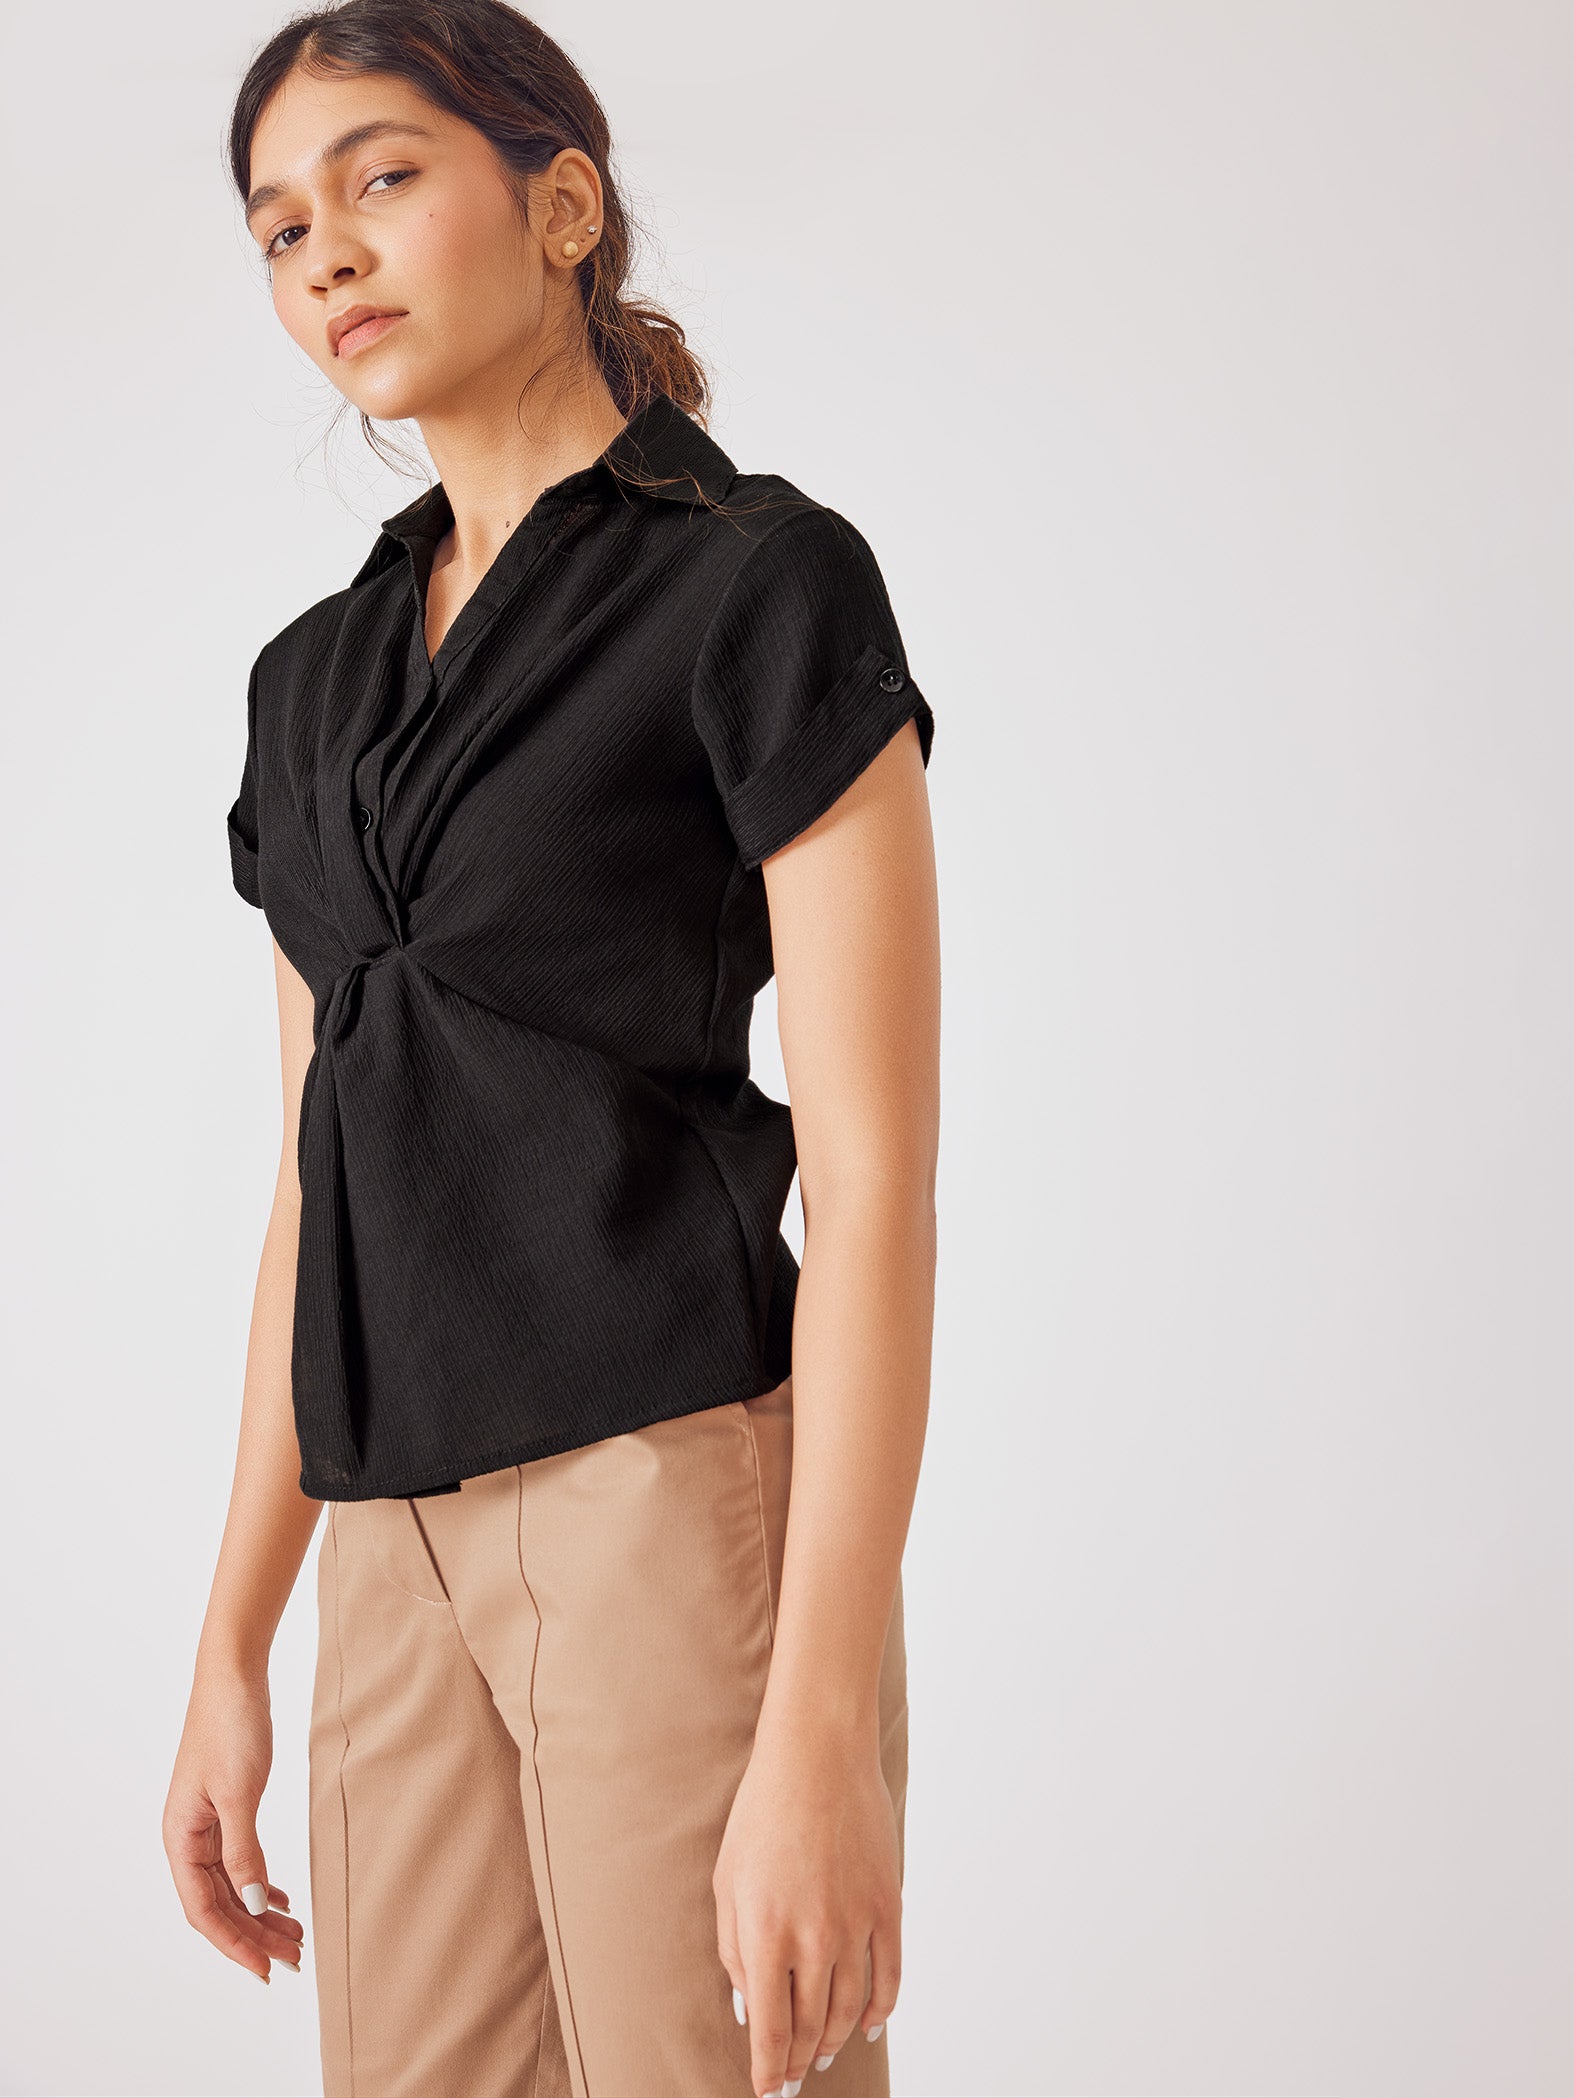 Black Twist Knotted Top